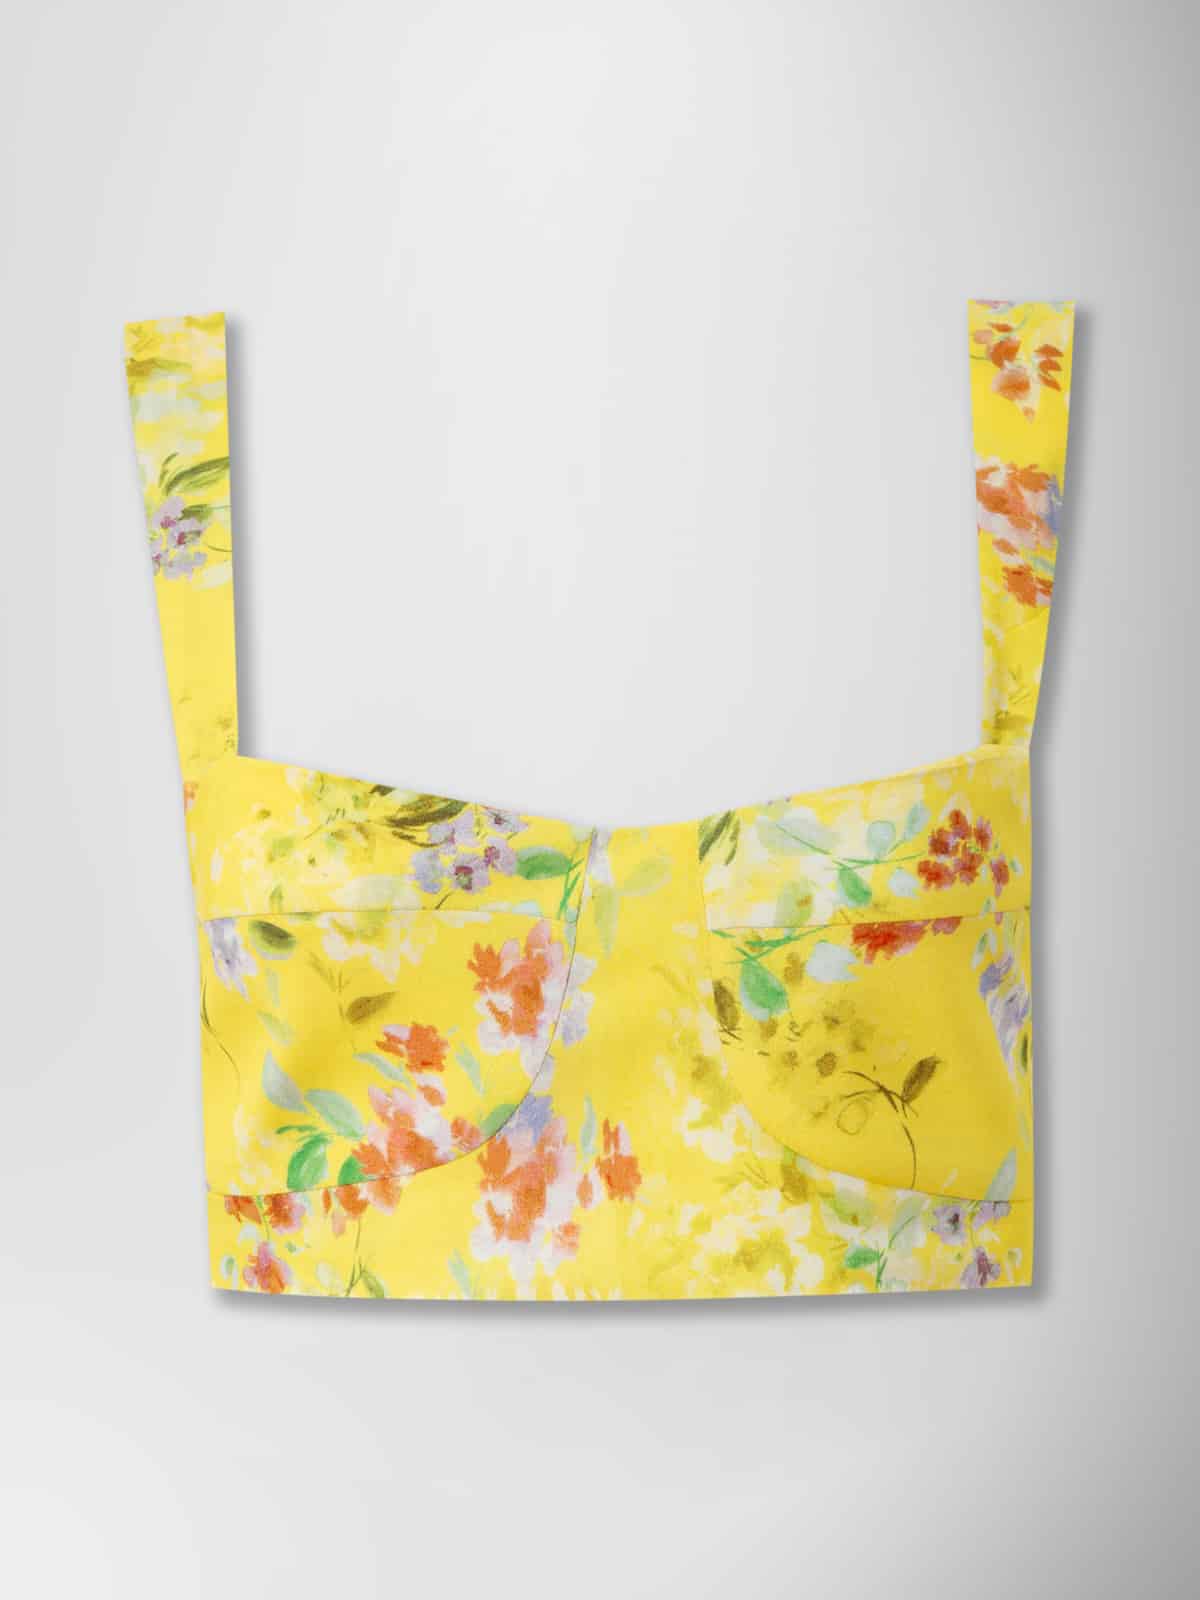 TOP "EZE" YELLOW FLORAL